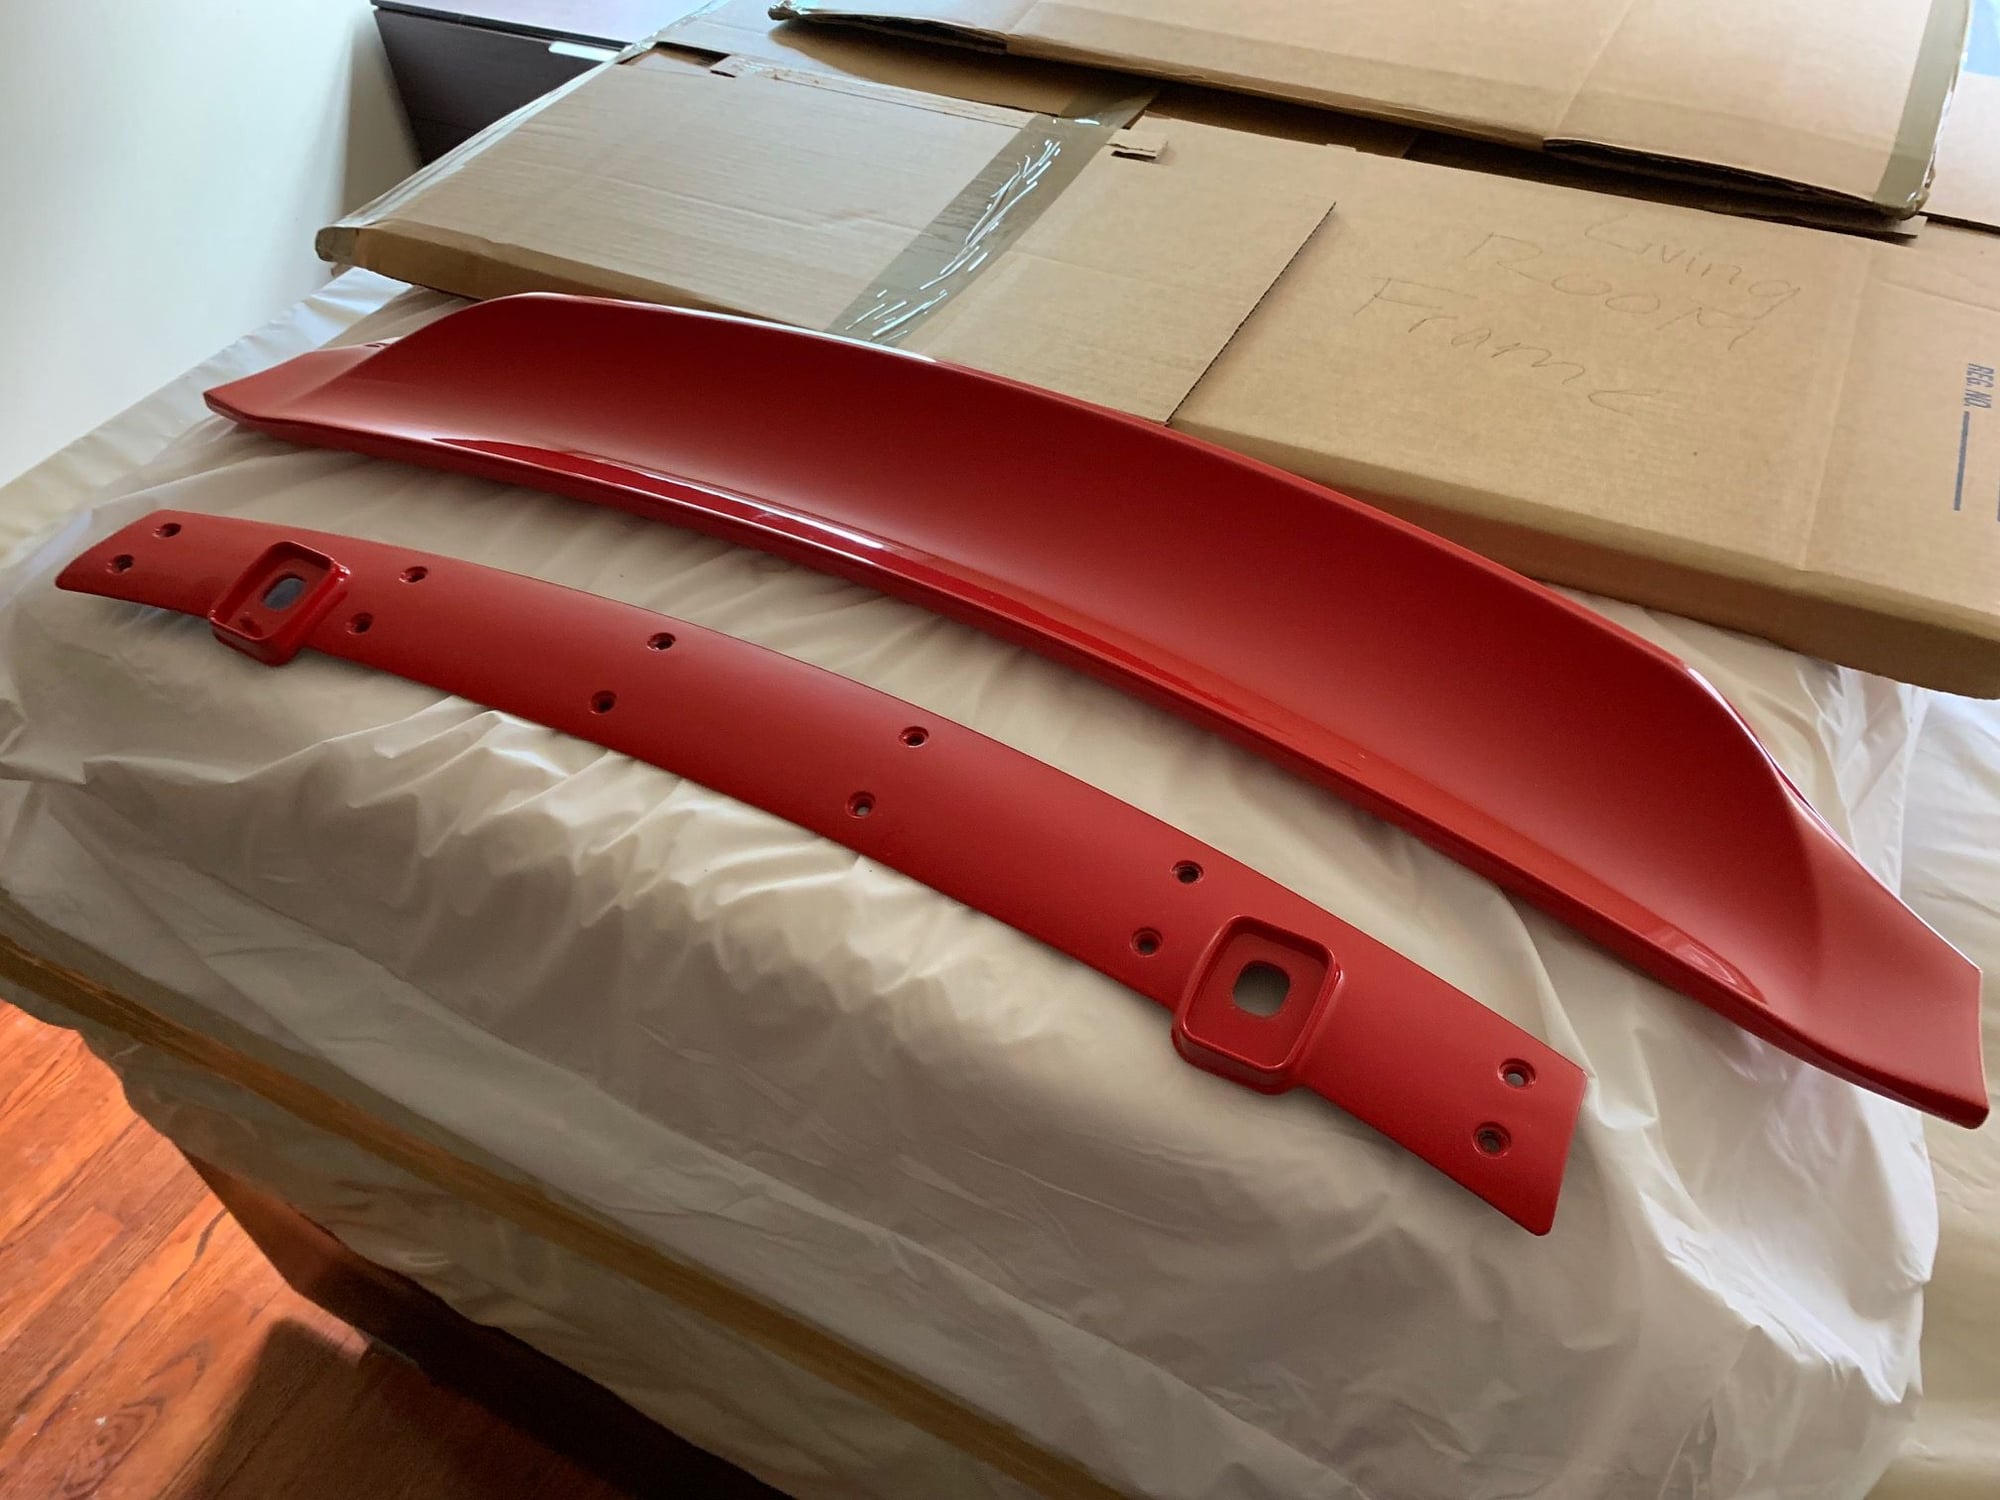 Exterior Body Parts - 981 Spyder/GT4 Ducktail Lip (Guards Red) - New - 2013 to 2016 Porsche Cayman - New York, NY 11357, United States